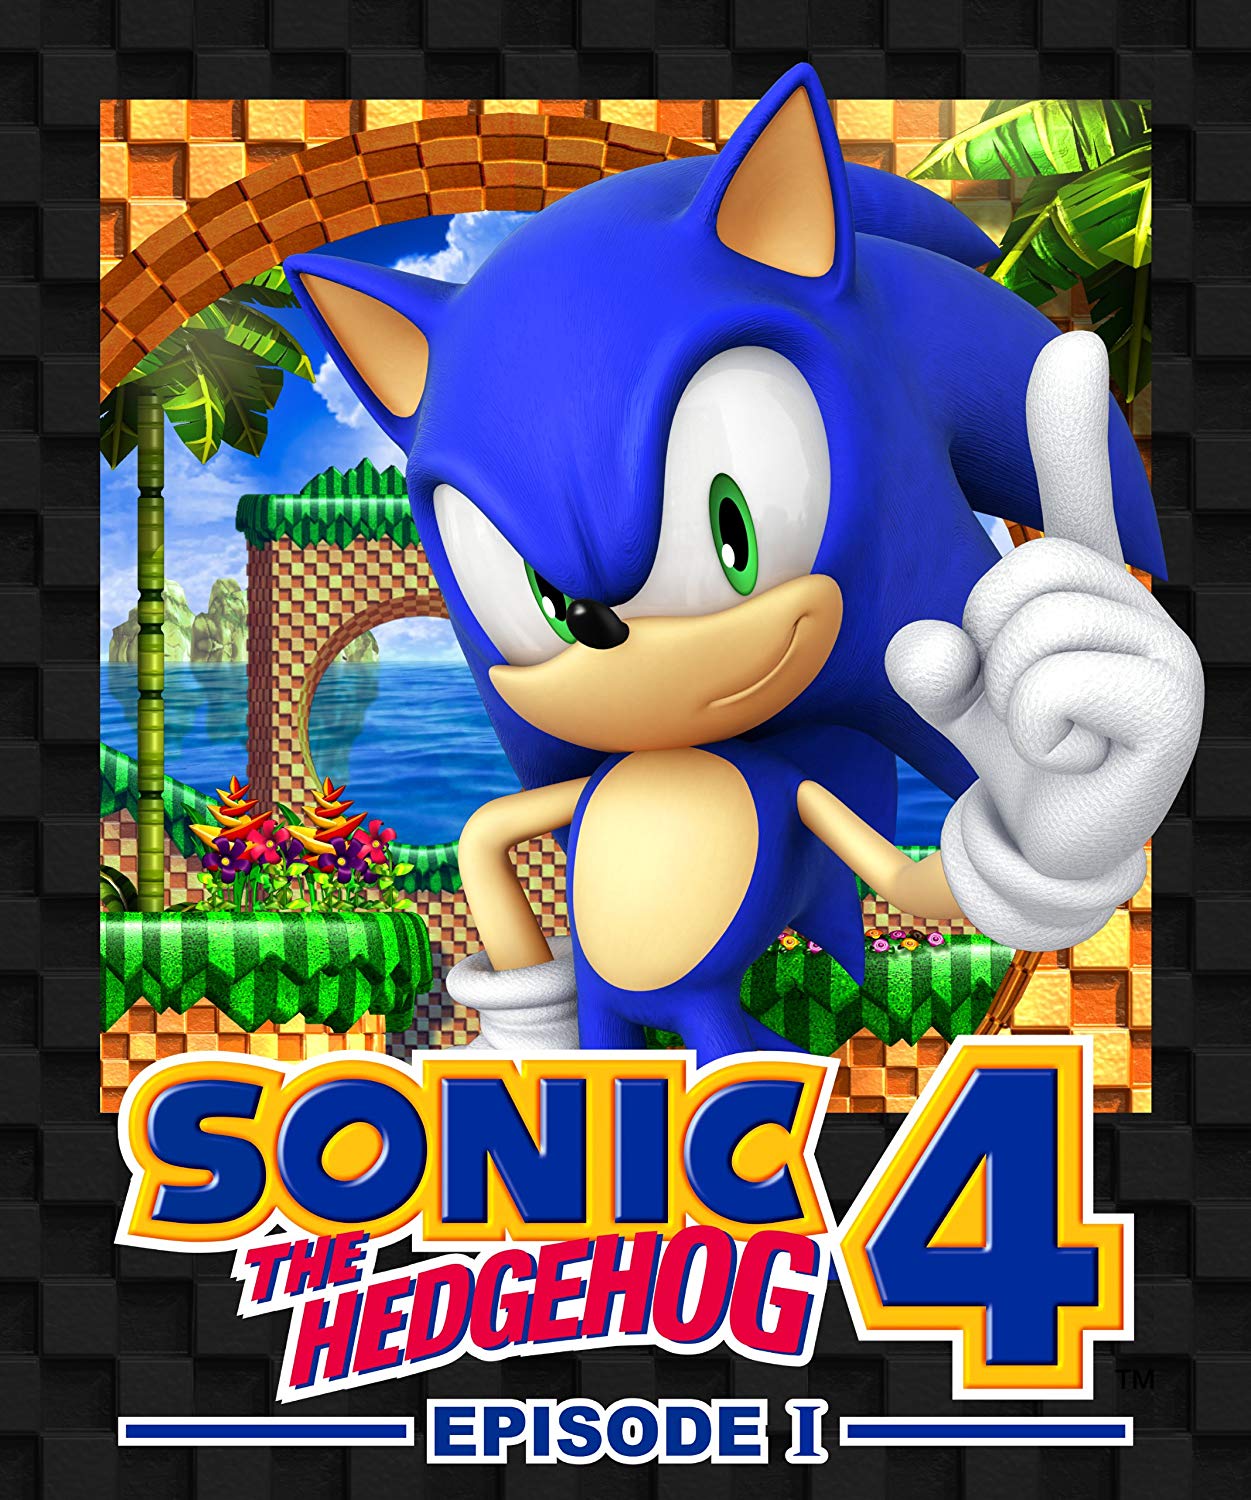 sonic 4 episode 2 free download